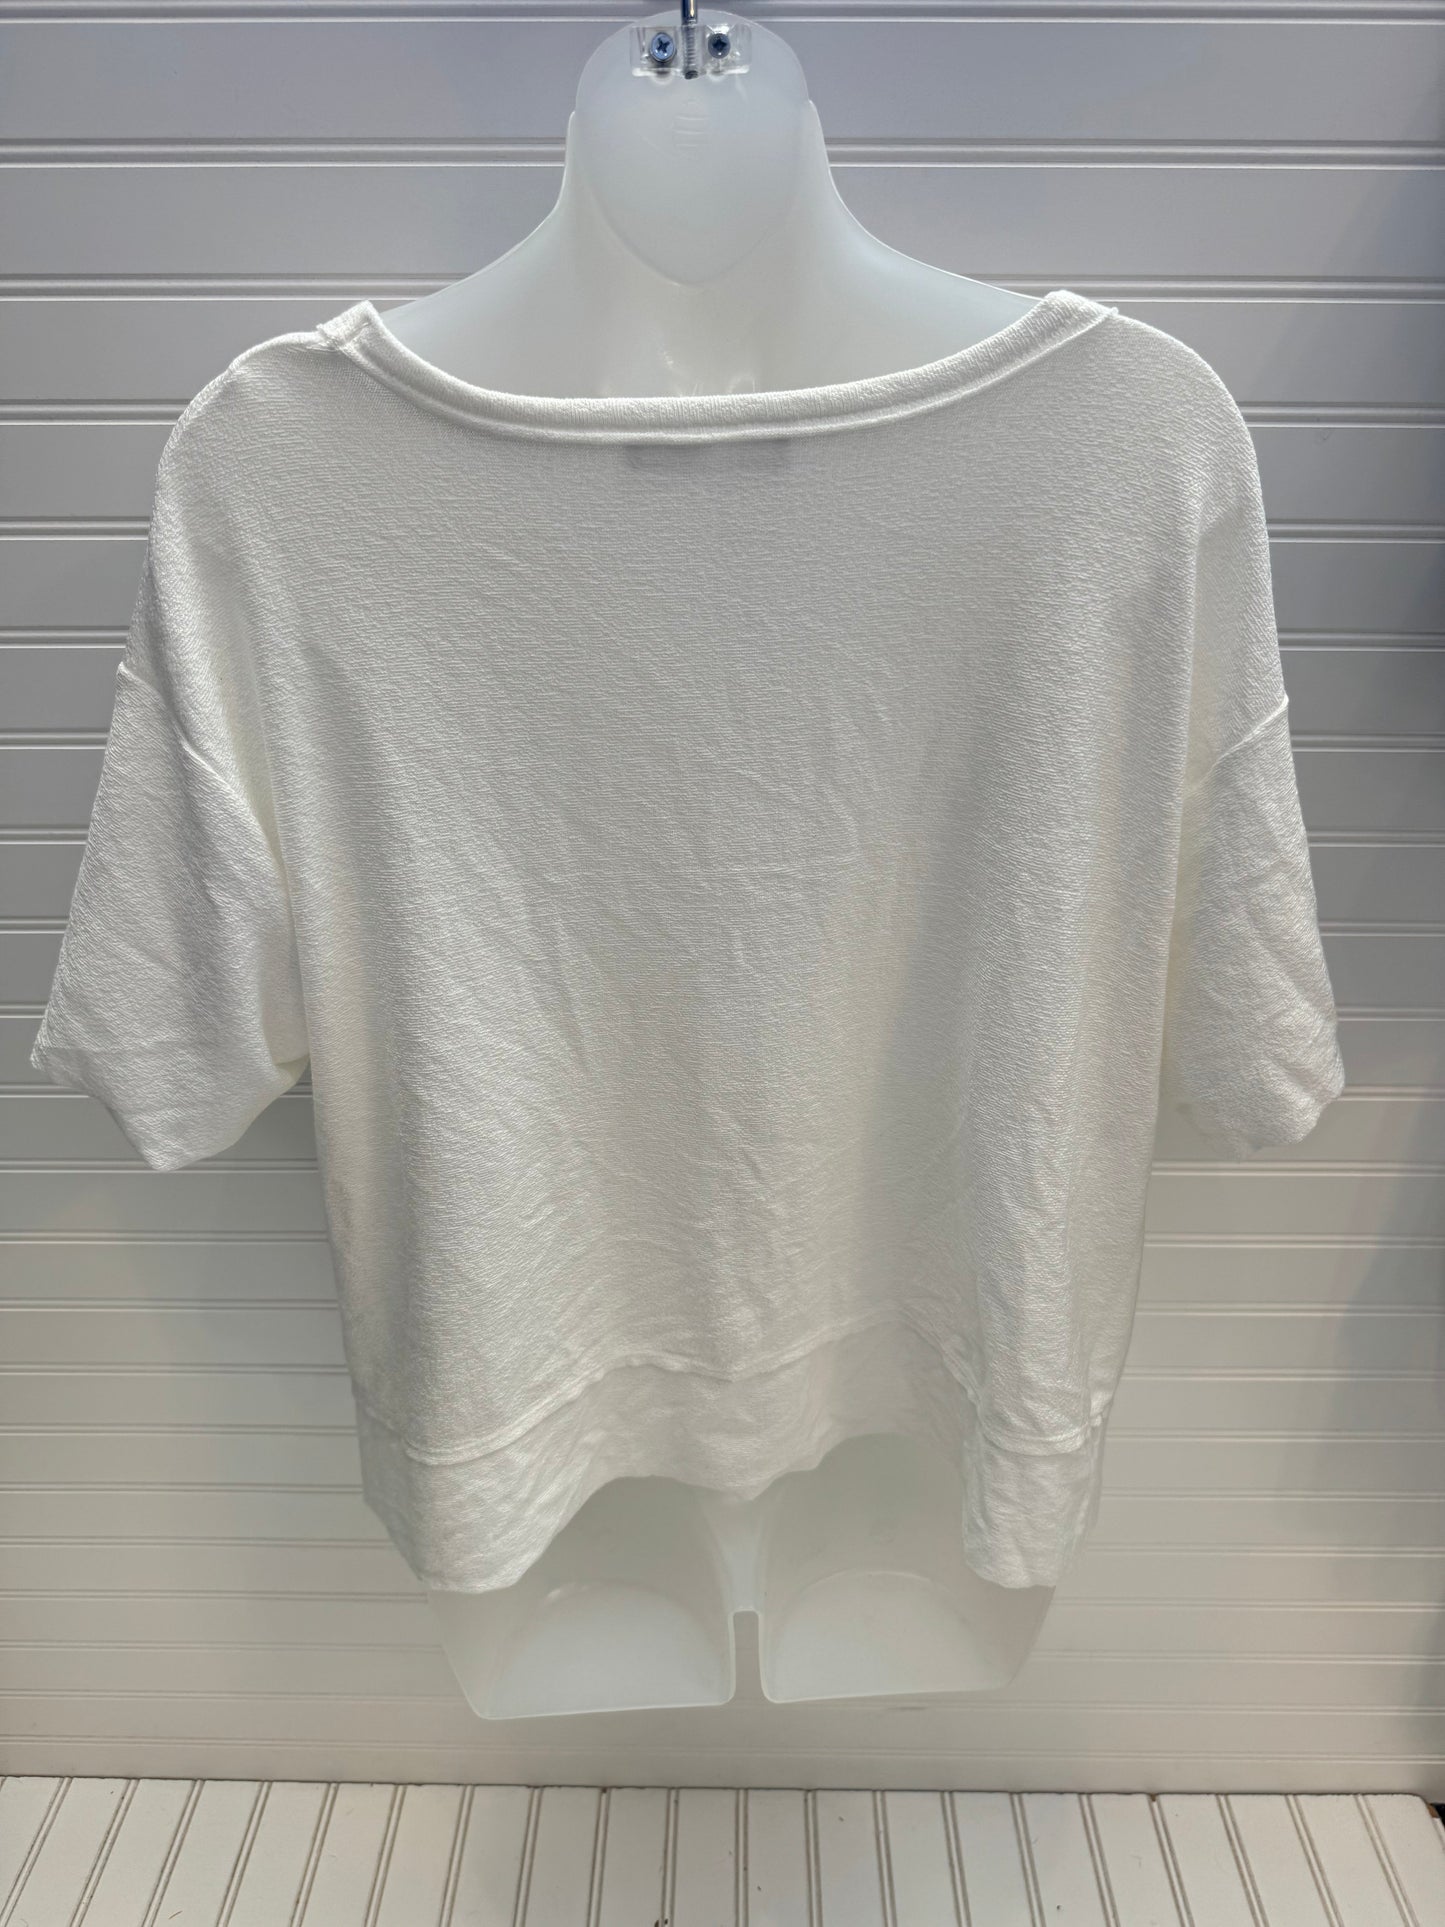 White Top Short Sleeve Six Fifty, Size S